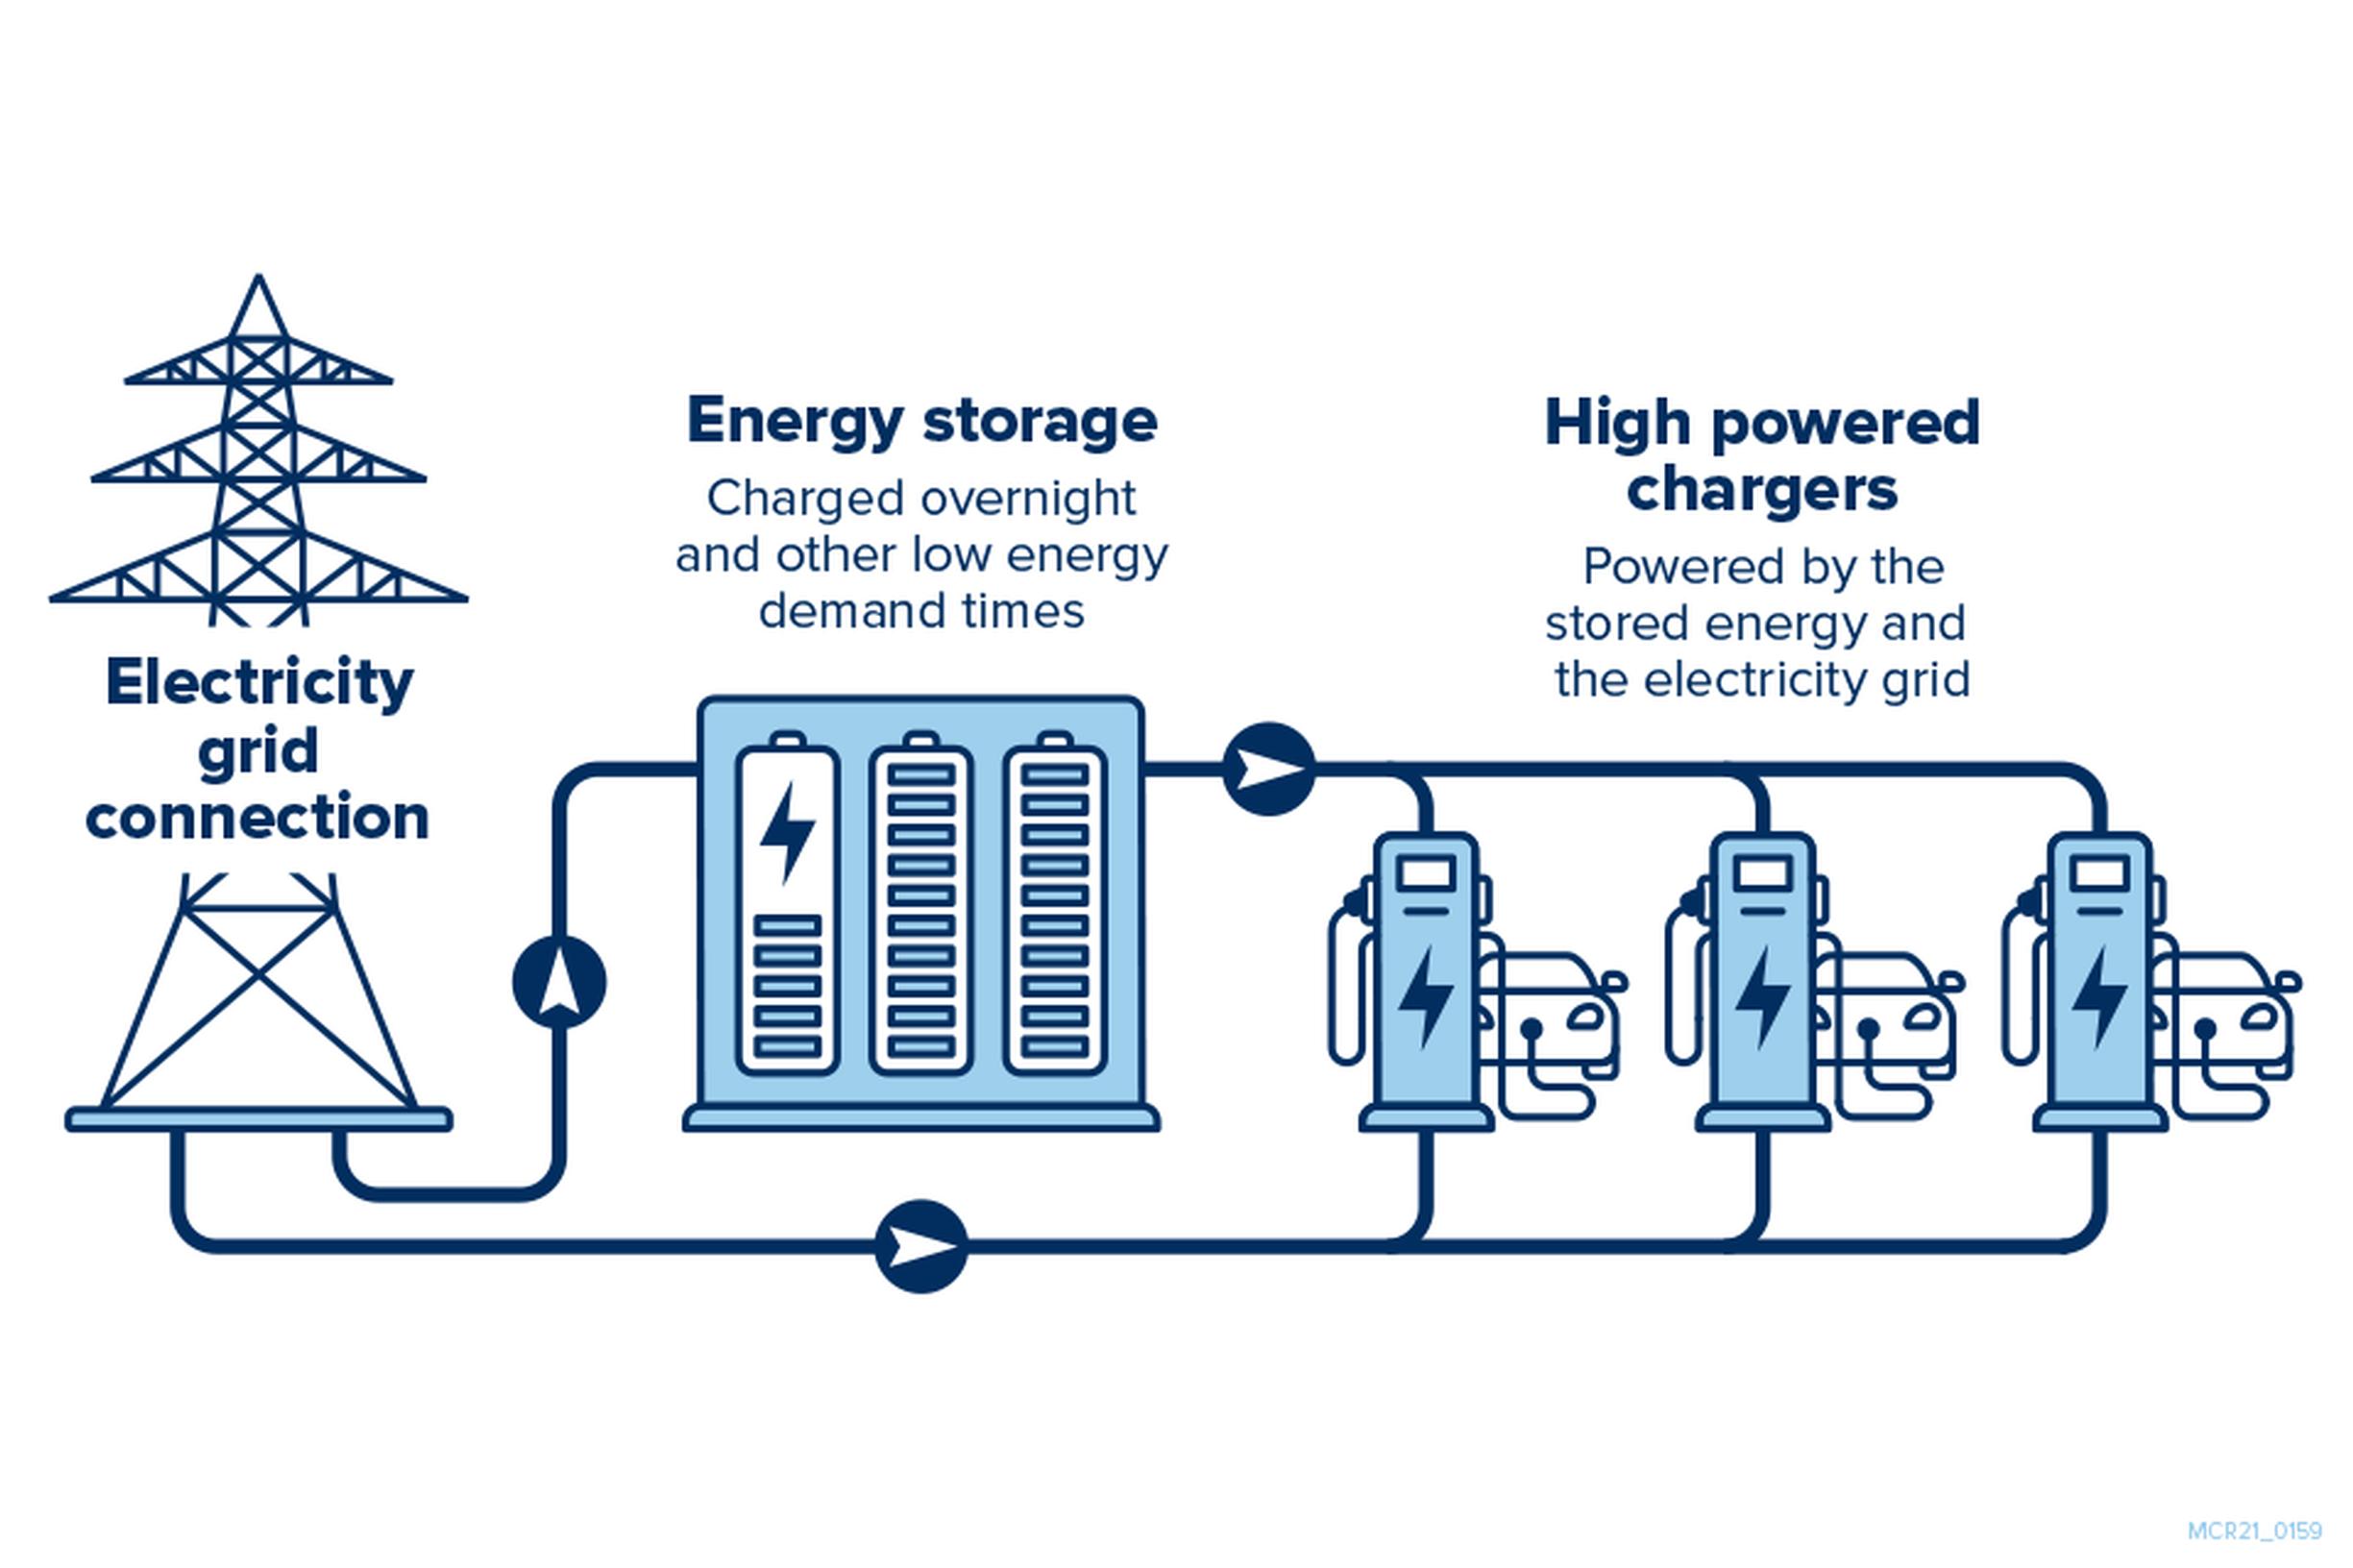 An energy storage system set-up